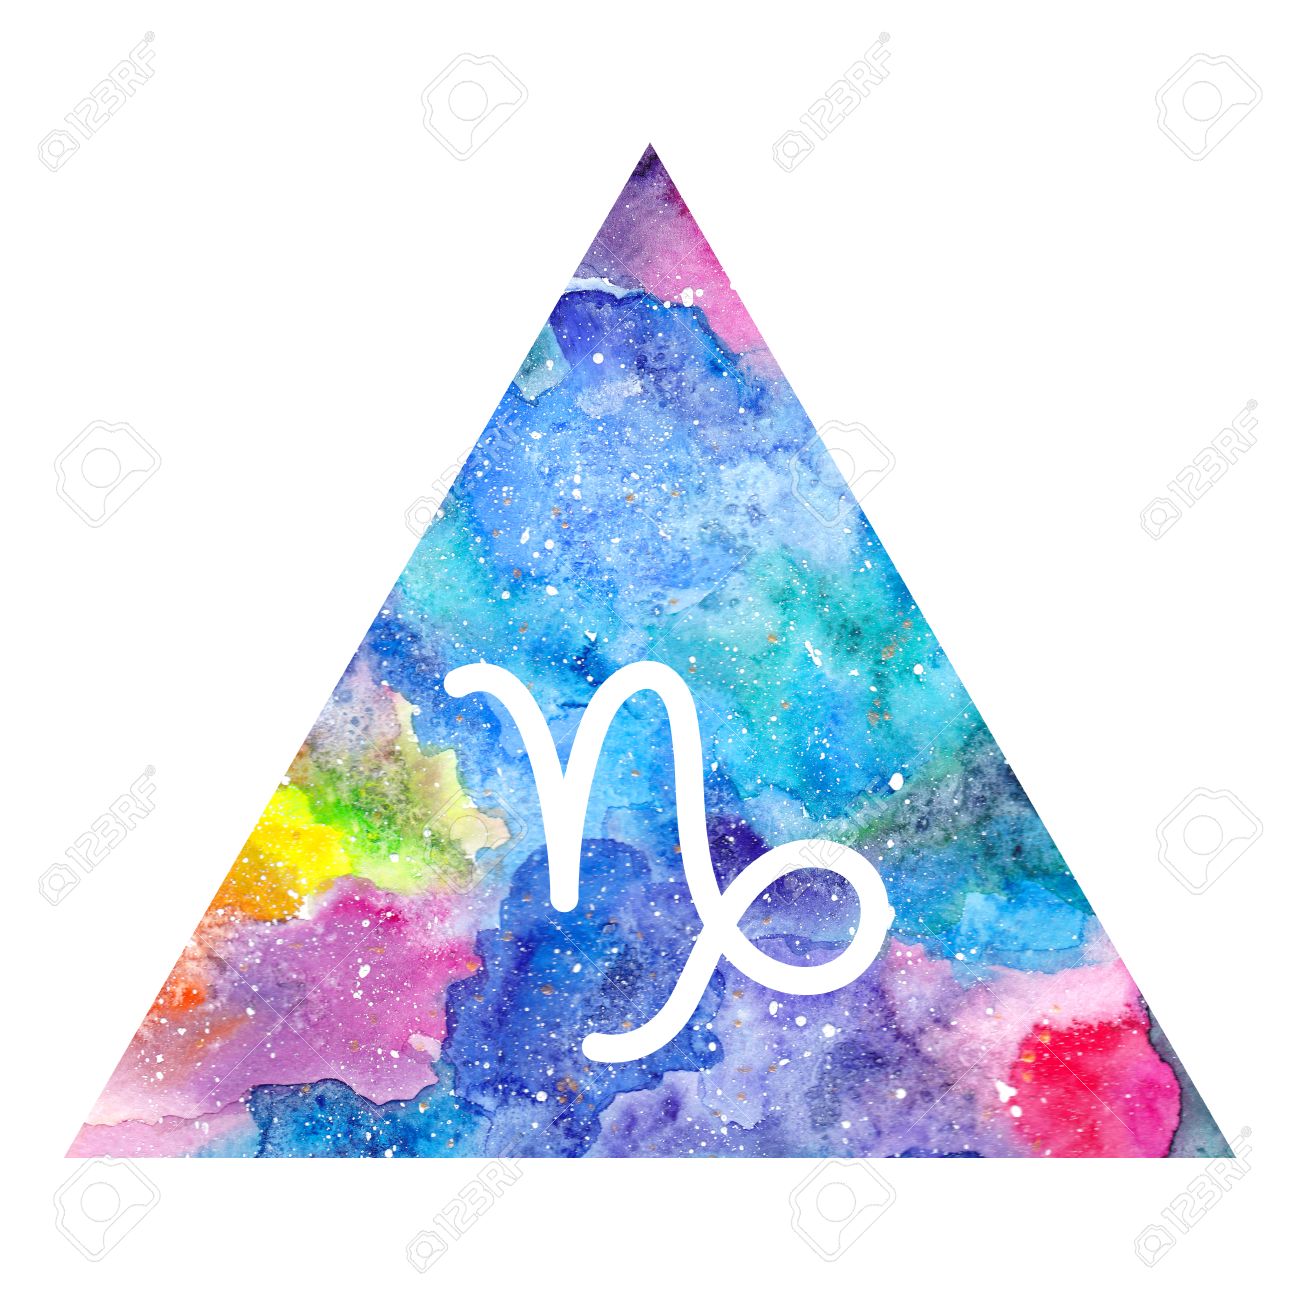 Capricorn Zodiac Sign On Watercolor Triangle Background Astrology